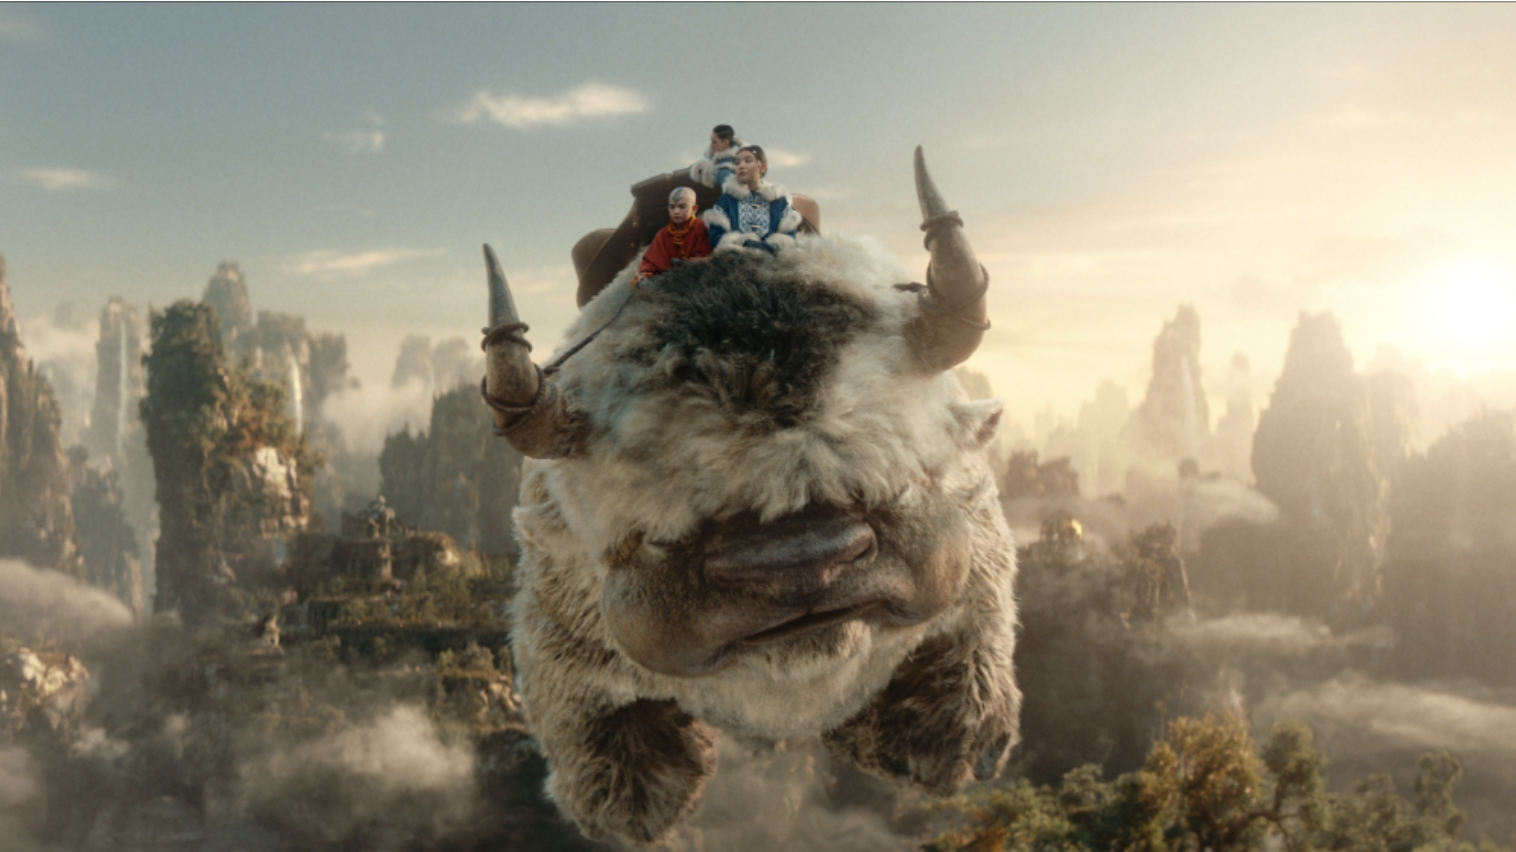 Characters from movie riding a flying beast over a fantastical landscape